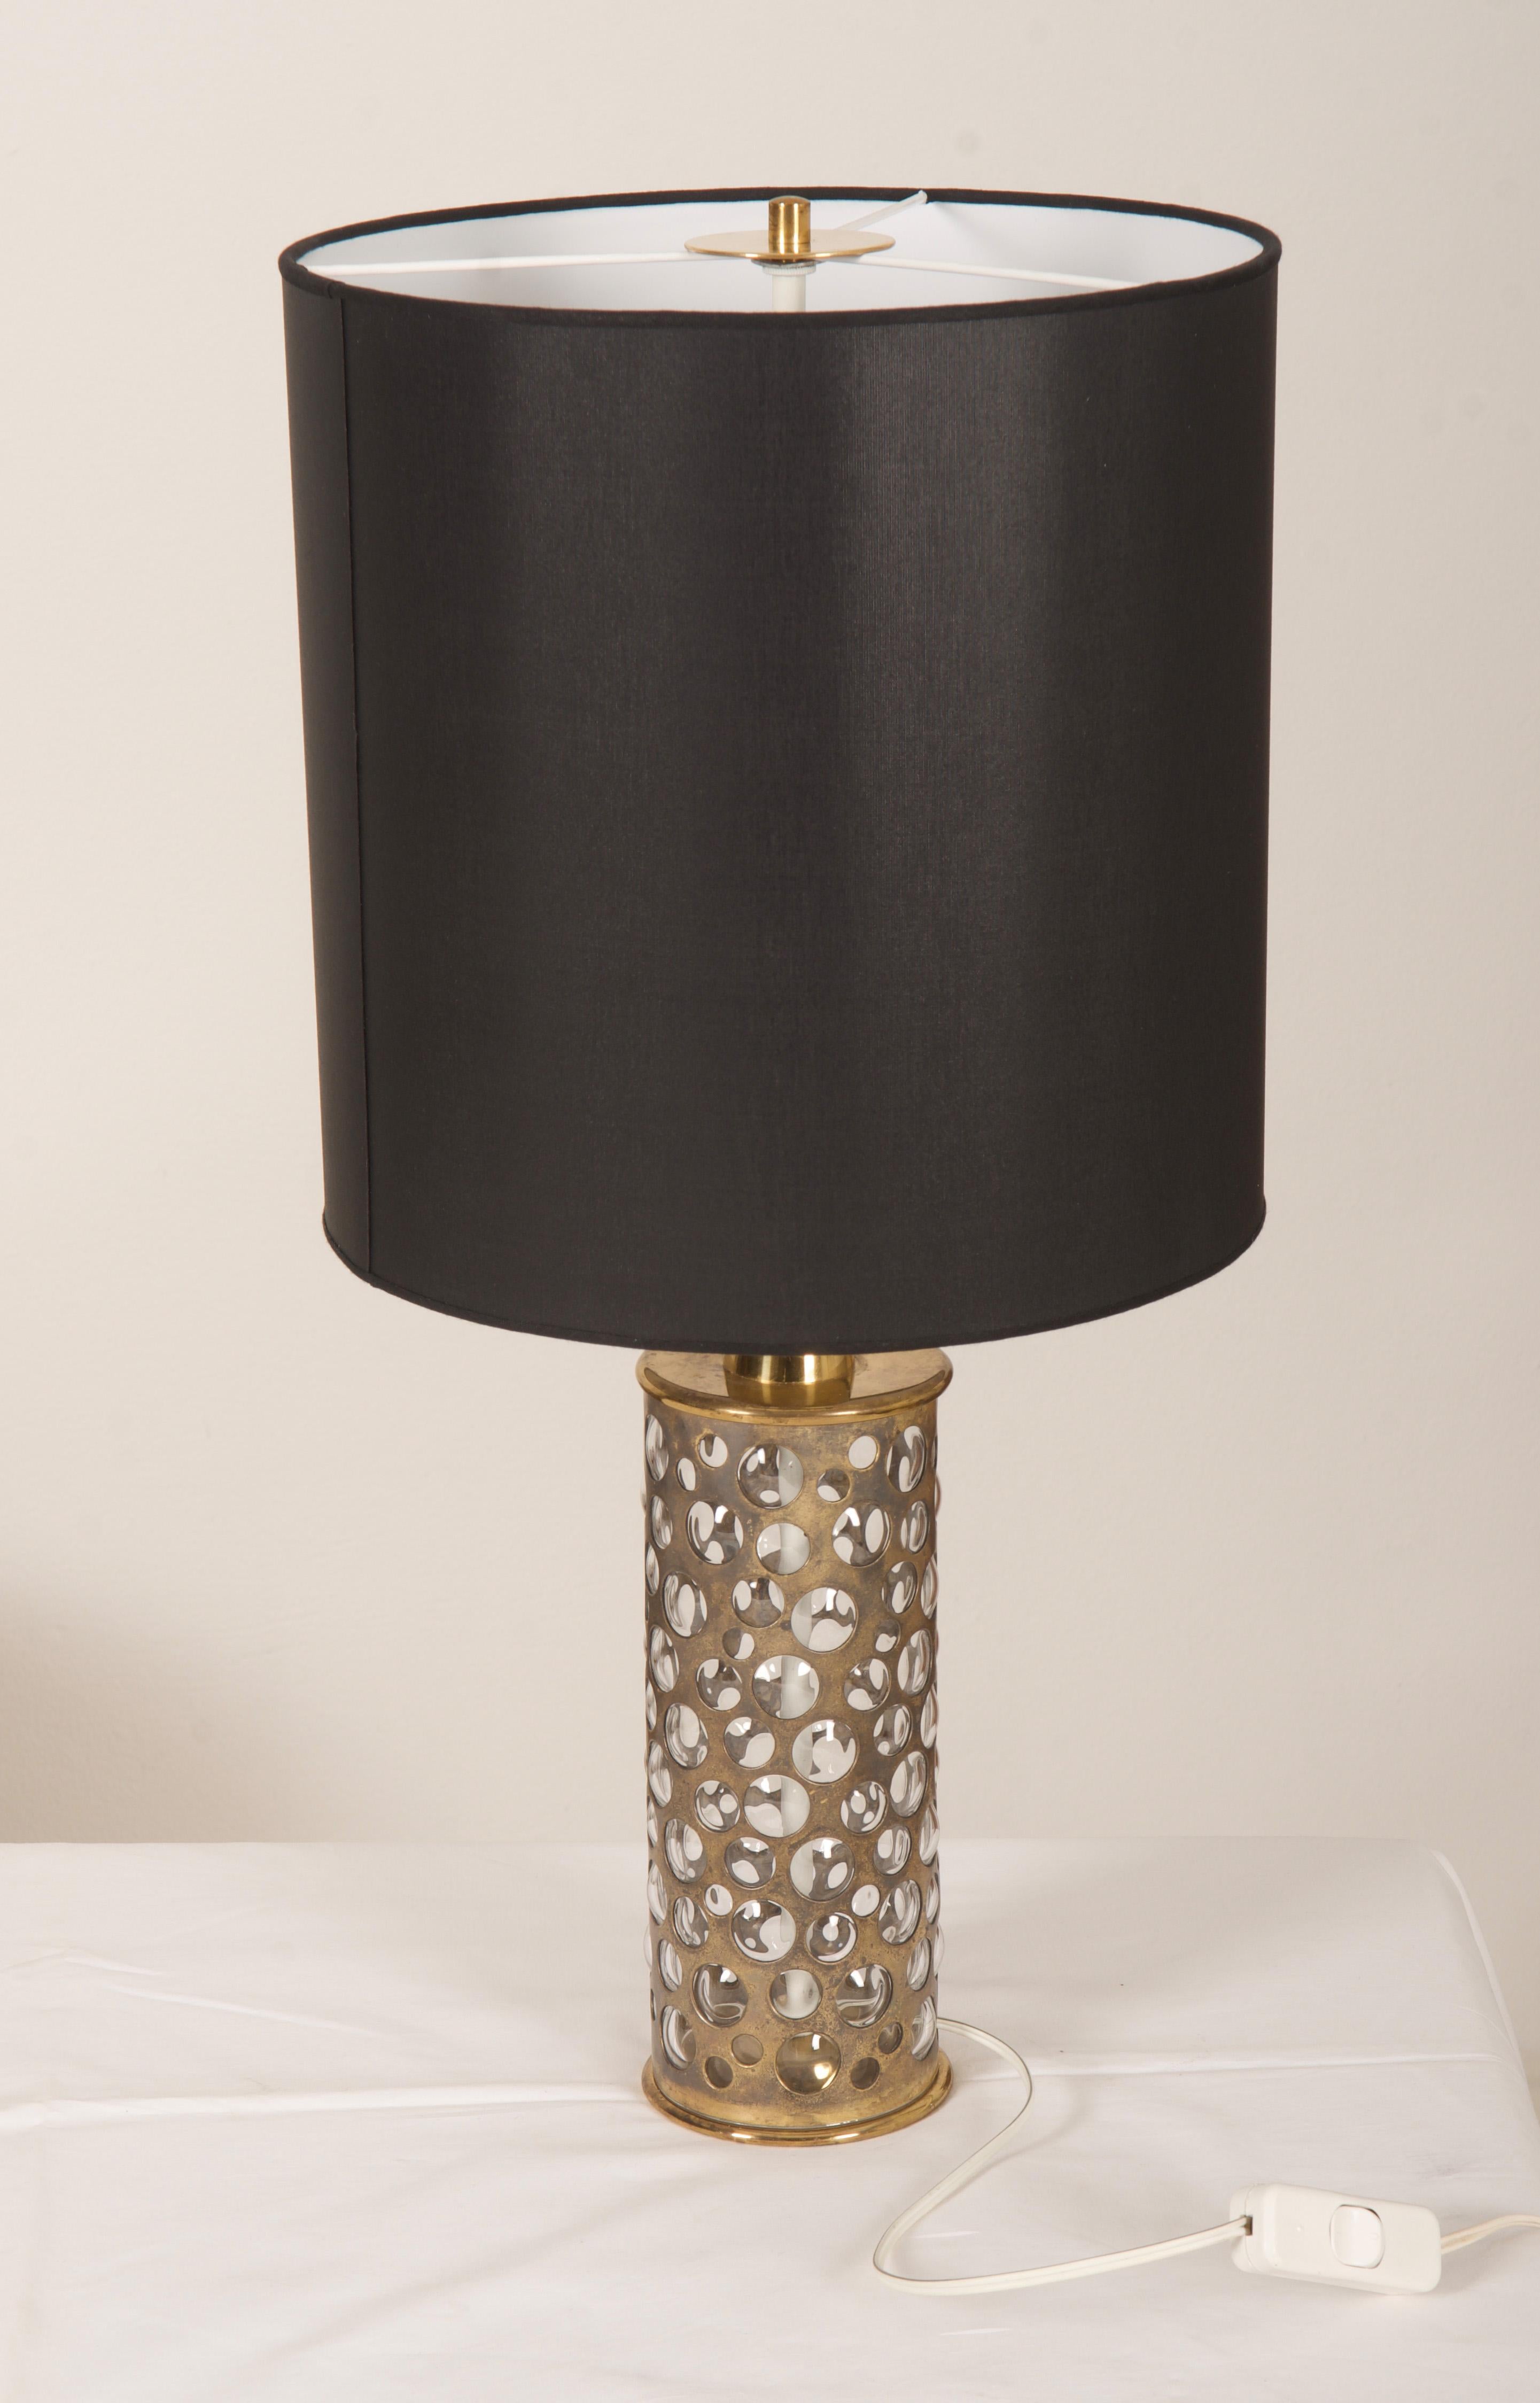 Brass construction with handblowed glass stand and shade fitted with two E27 sockets. 
Made by Rupert Nikoll in the 1960s in Vienna.